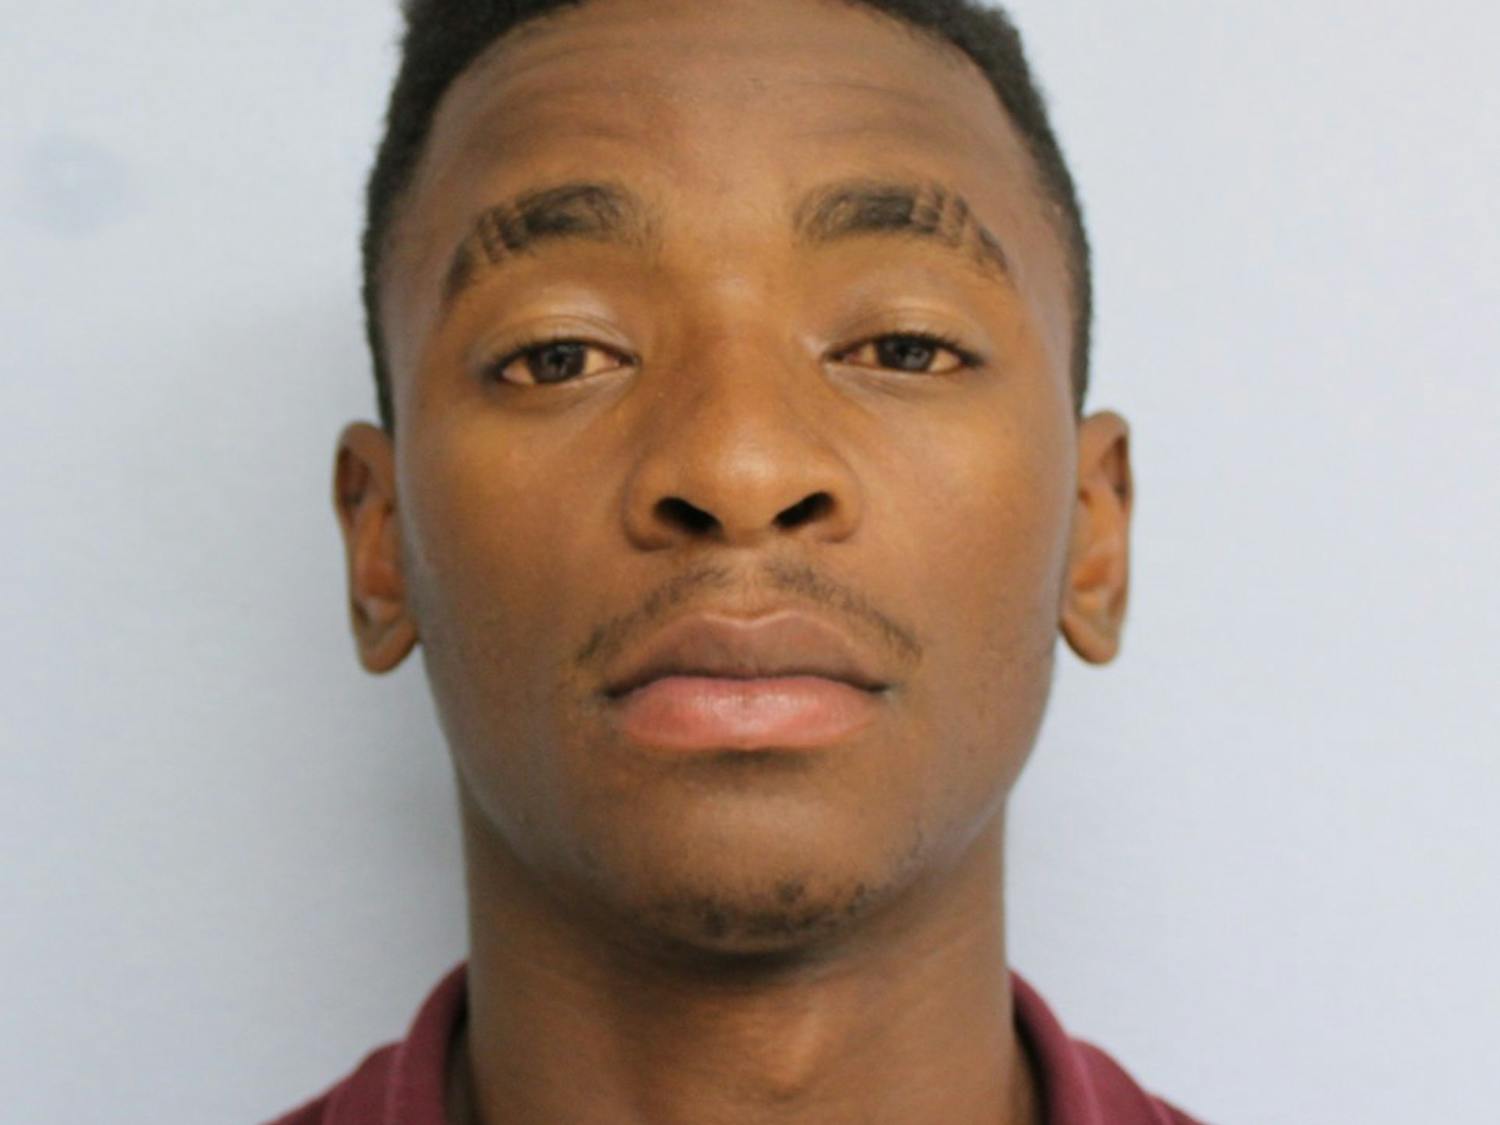 Tommie L. Tyson Jr., 19, was arrested after a string of robberies in downtown Auburn.